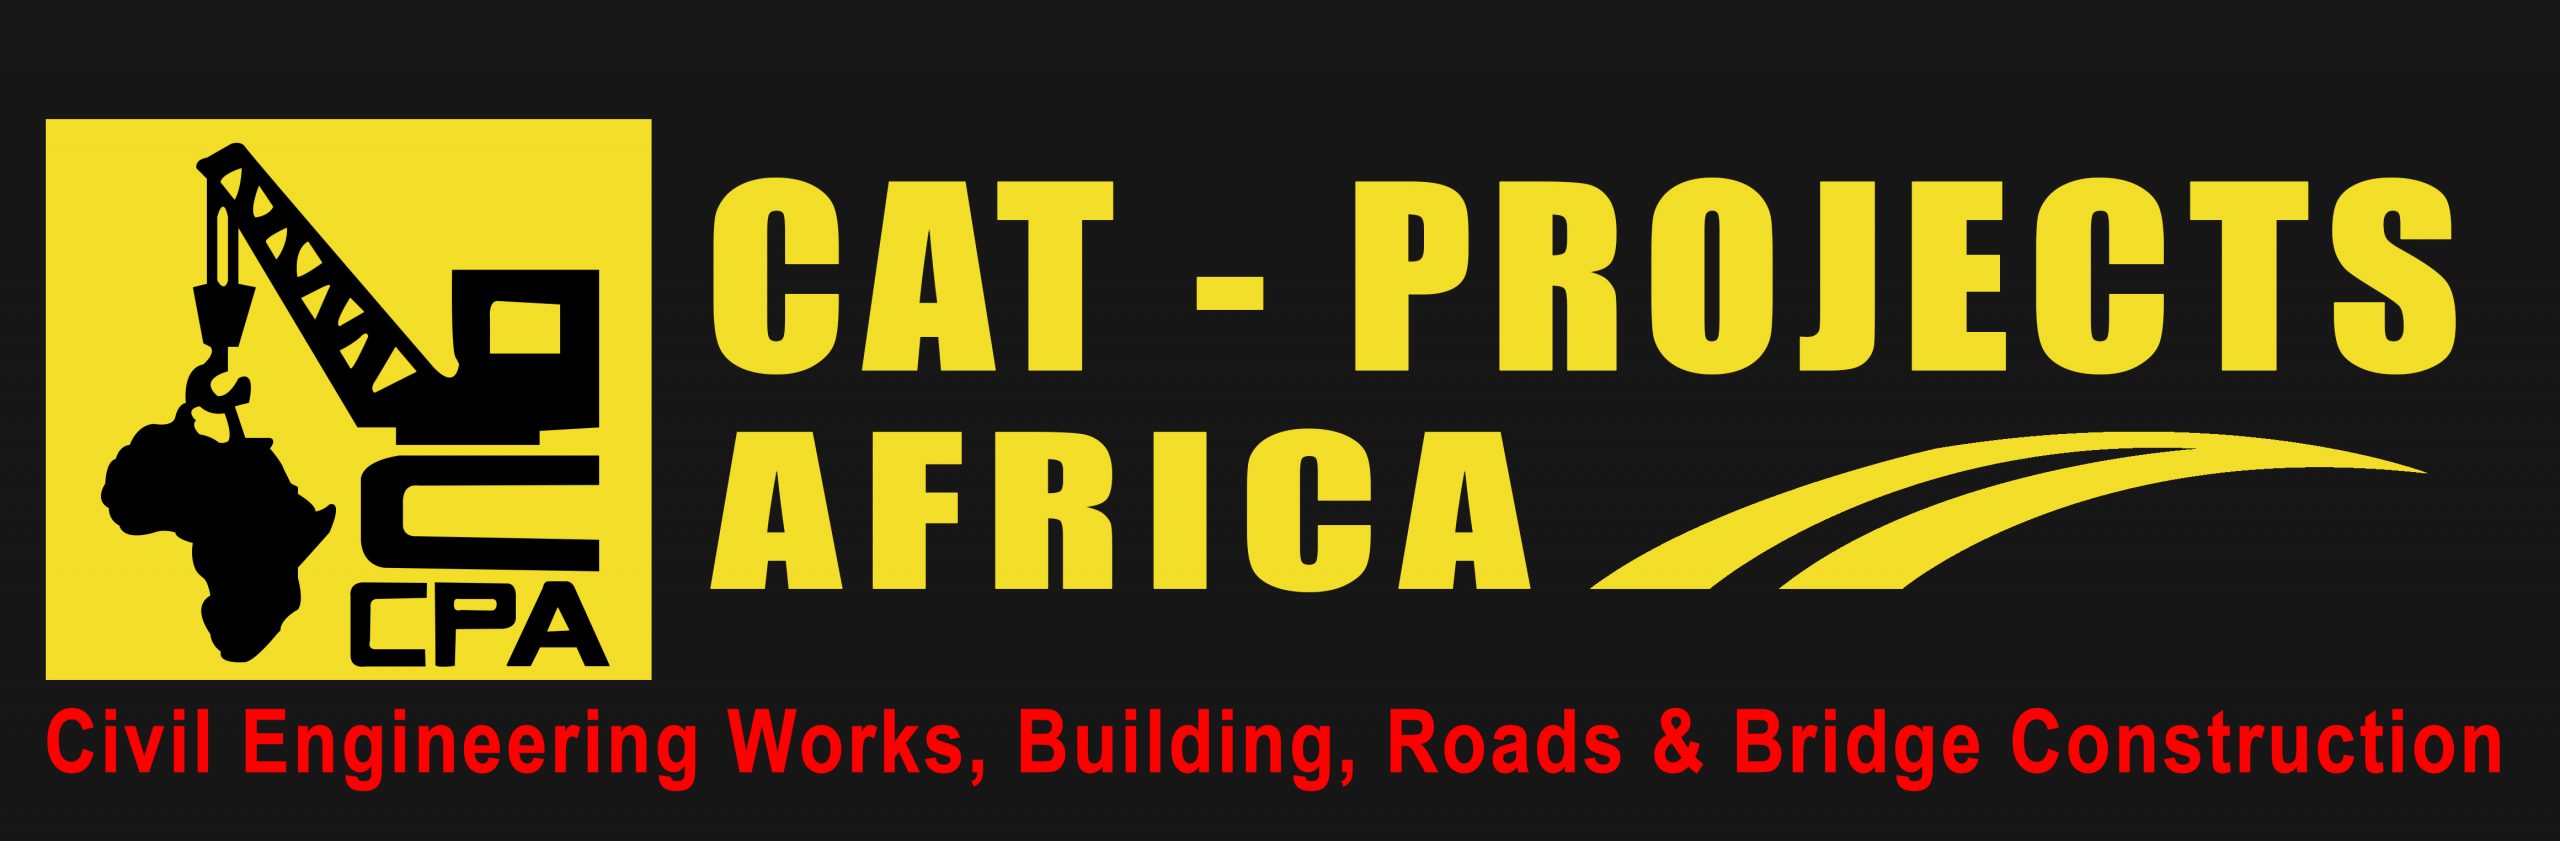 CAT PROJECTS AFRICA